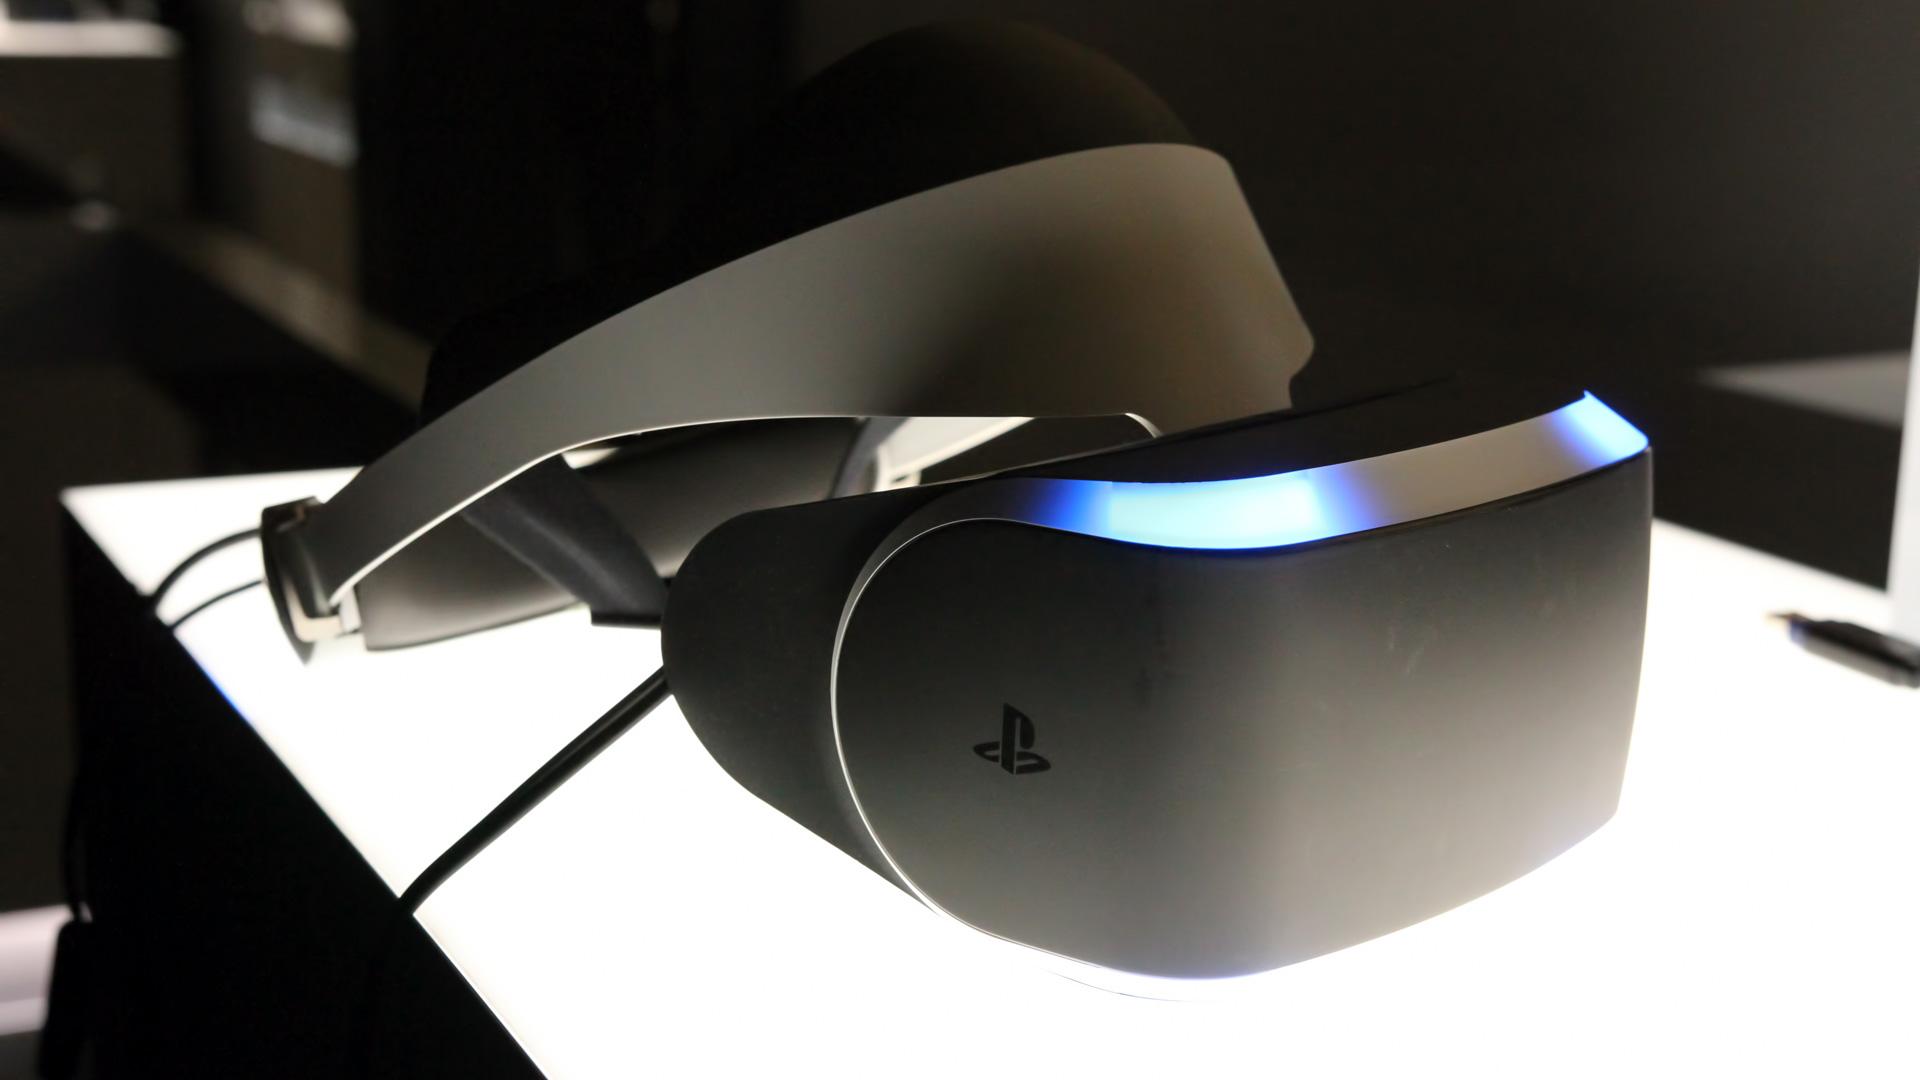 Does Oculus Rift Work With PS5?